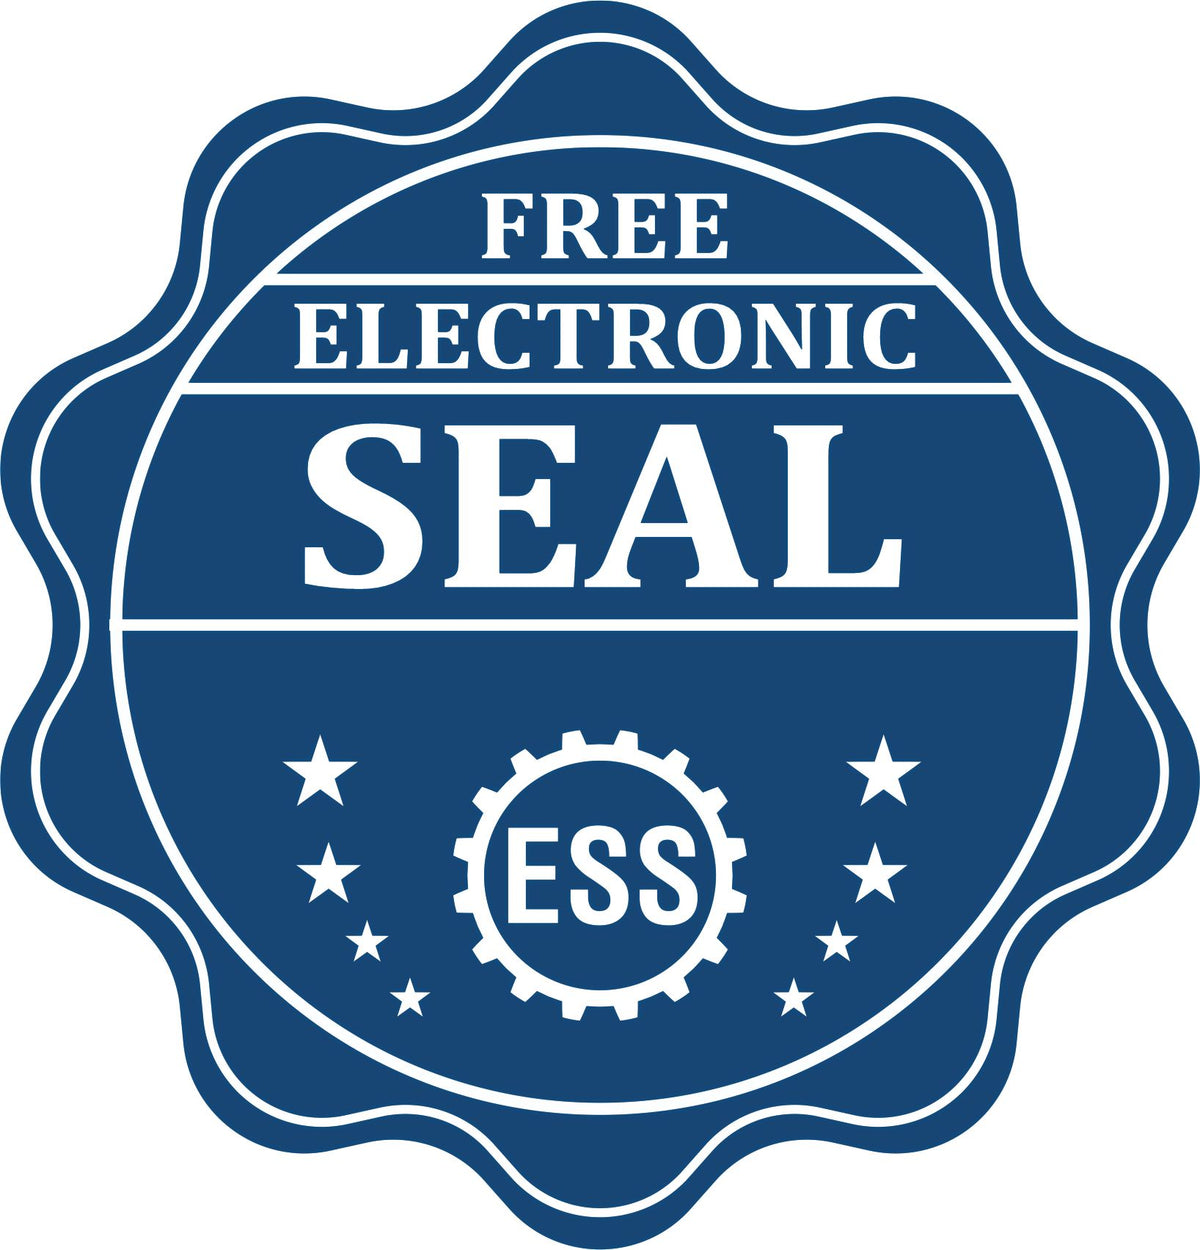 A badge showing a free electronic seal for the Premium MaxLight Pre-Inked Alabama Engineering Stamp with stars and the ESS gear on the emblem.